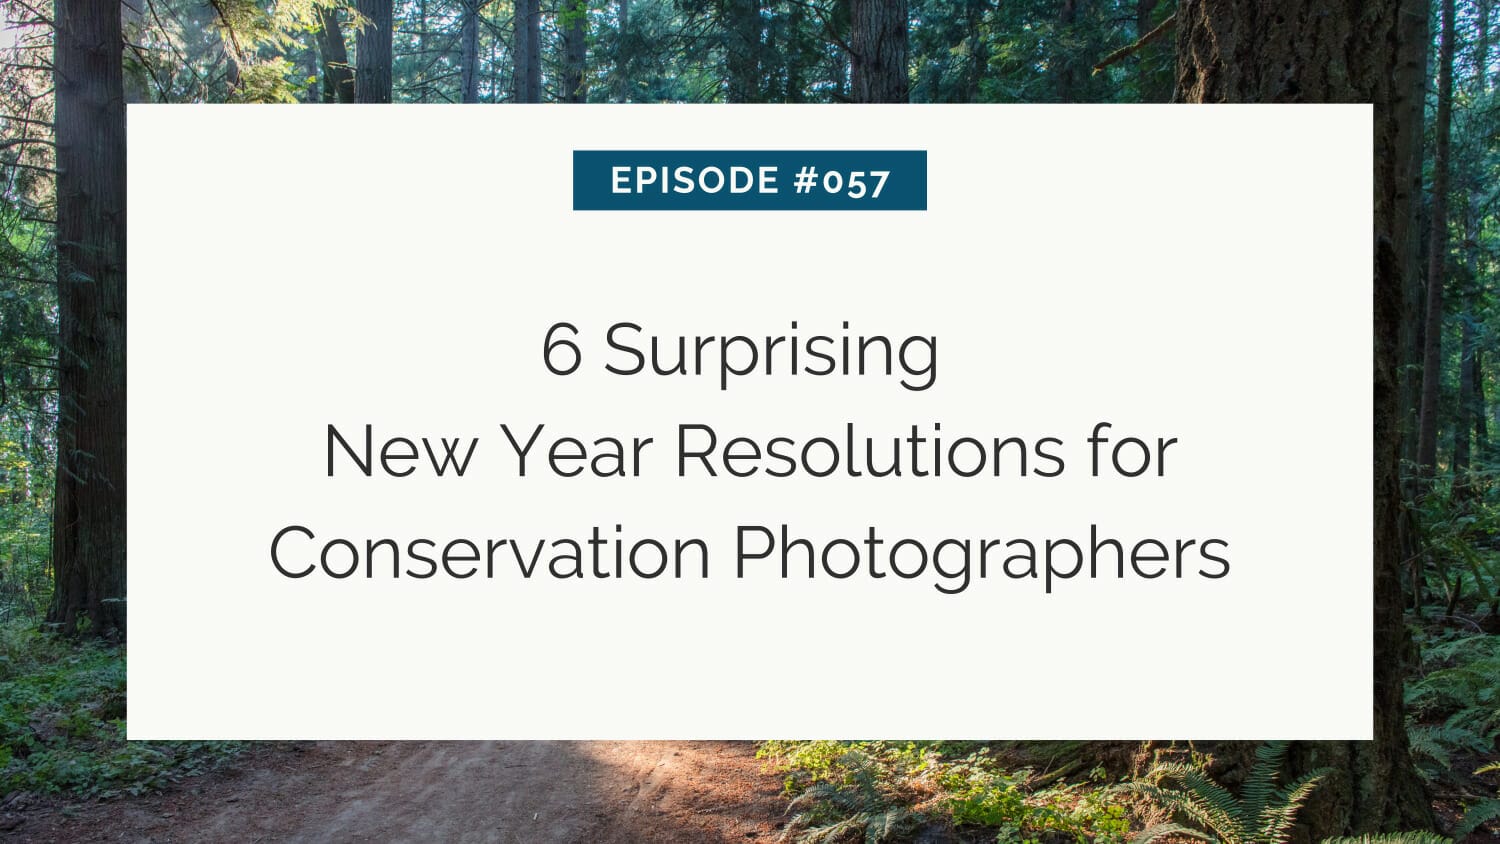 Episode #057: 6 surprising new year resolutions for conservation photographers displayed on a board in a forest setting.